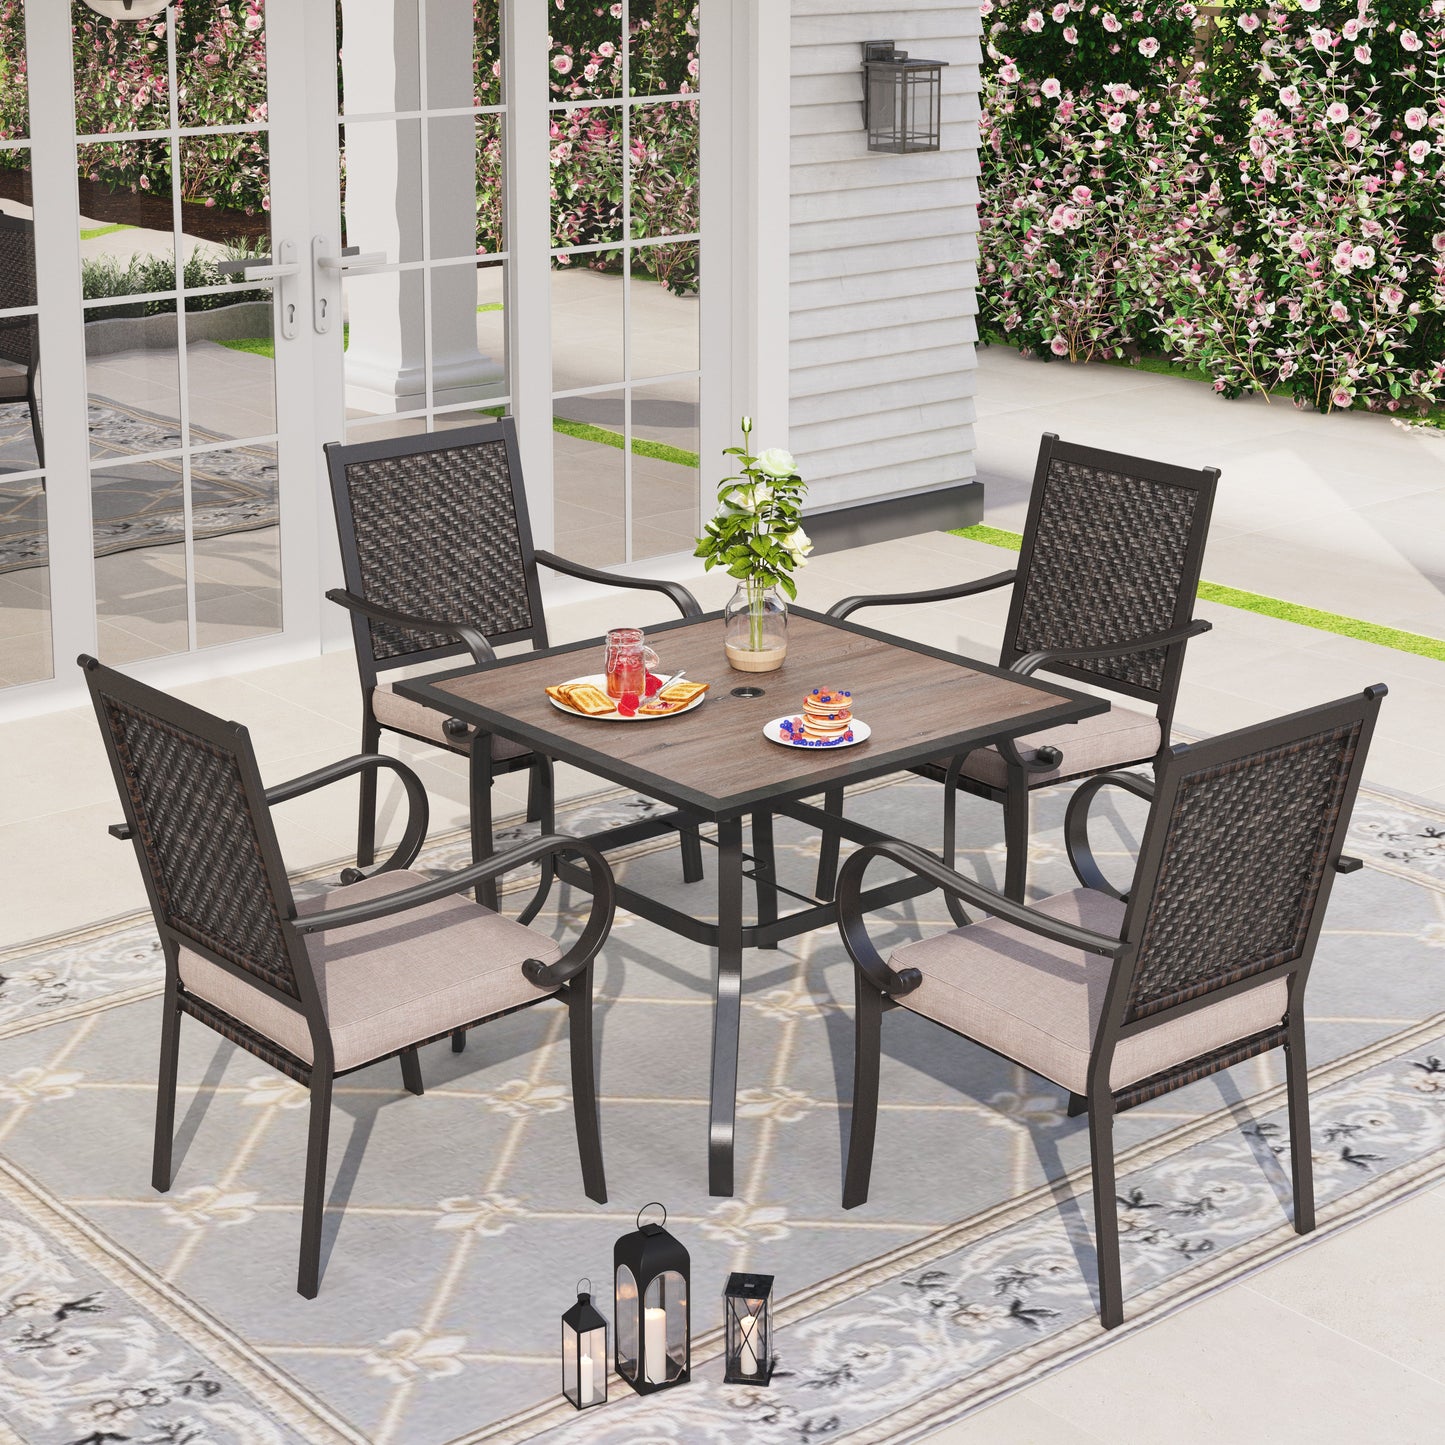 Sophia & William 5 Pieces Outdoor Patio Dining Set with 4 Rattan Cushioned Chairs & 1 Wood-like Square Table for 4 person